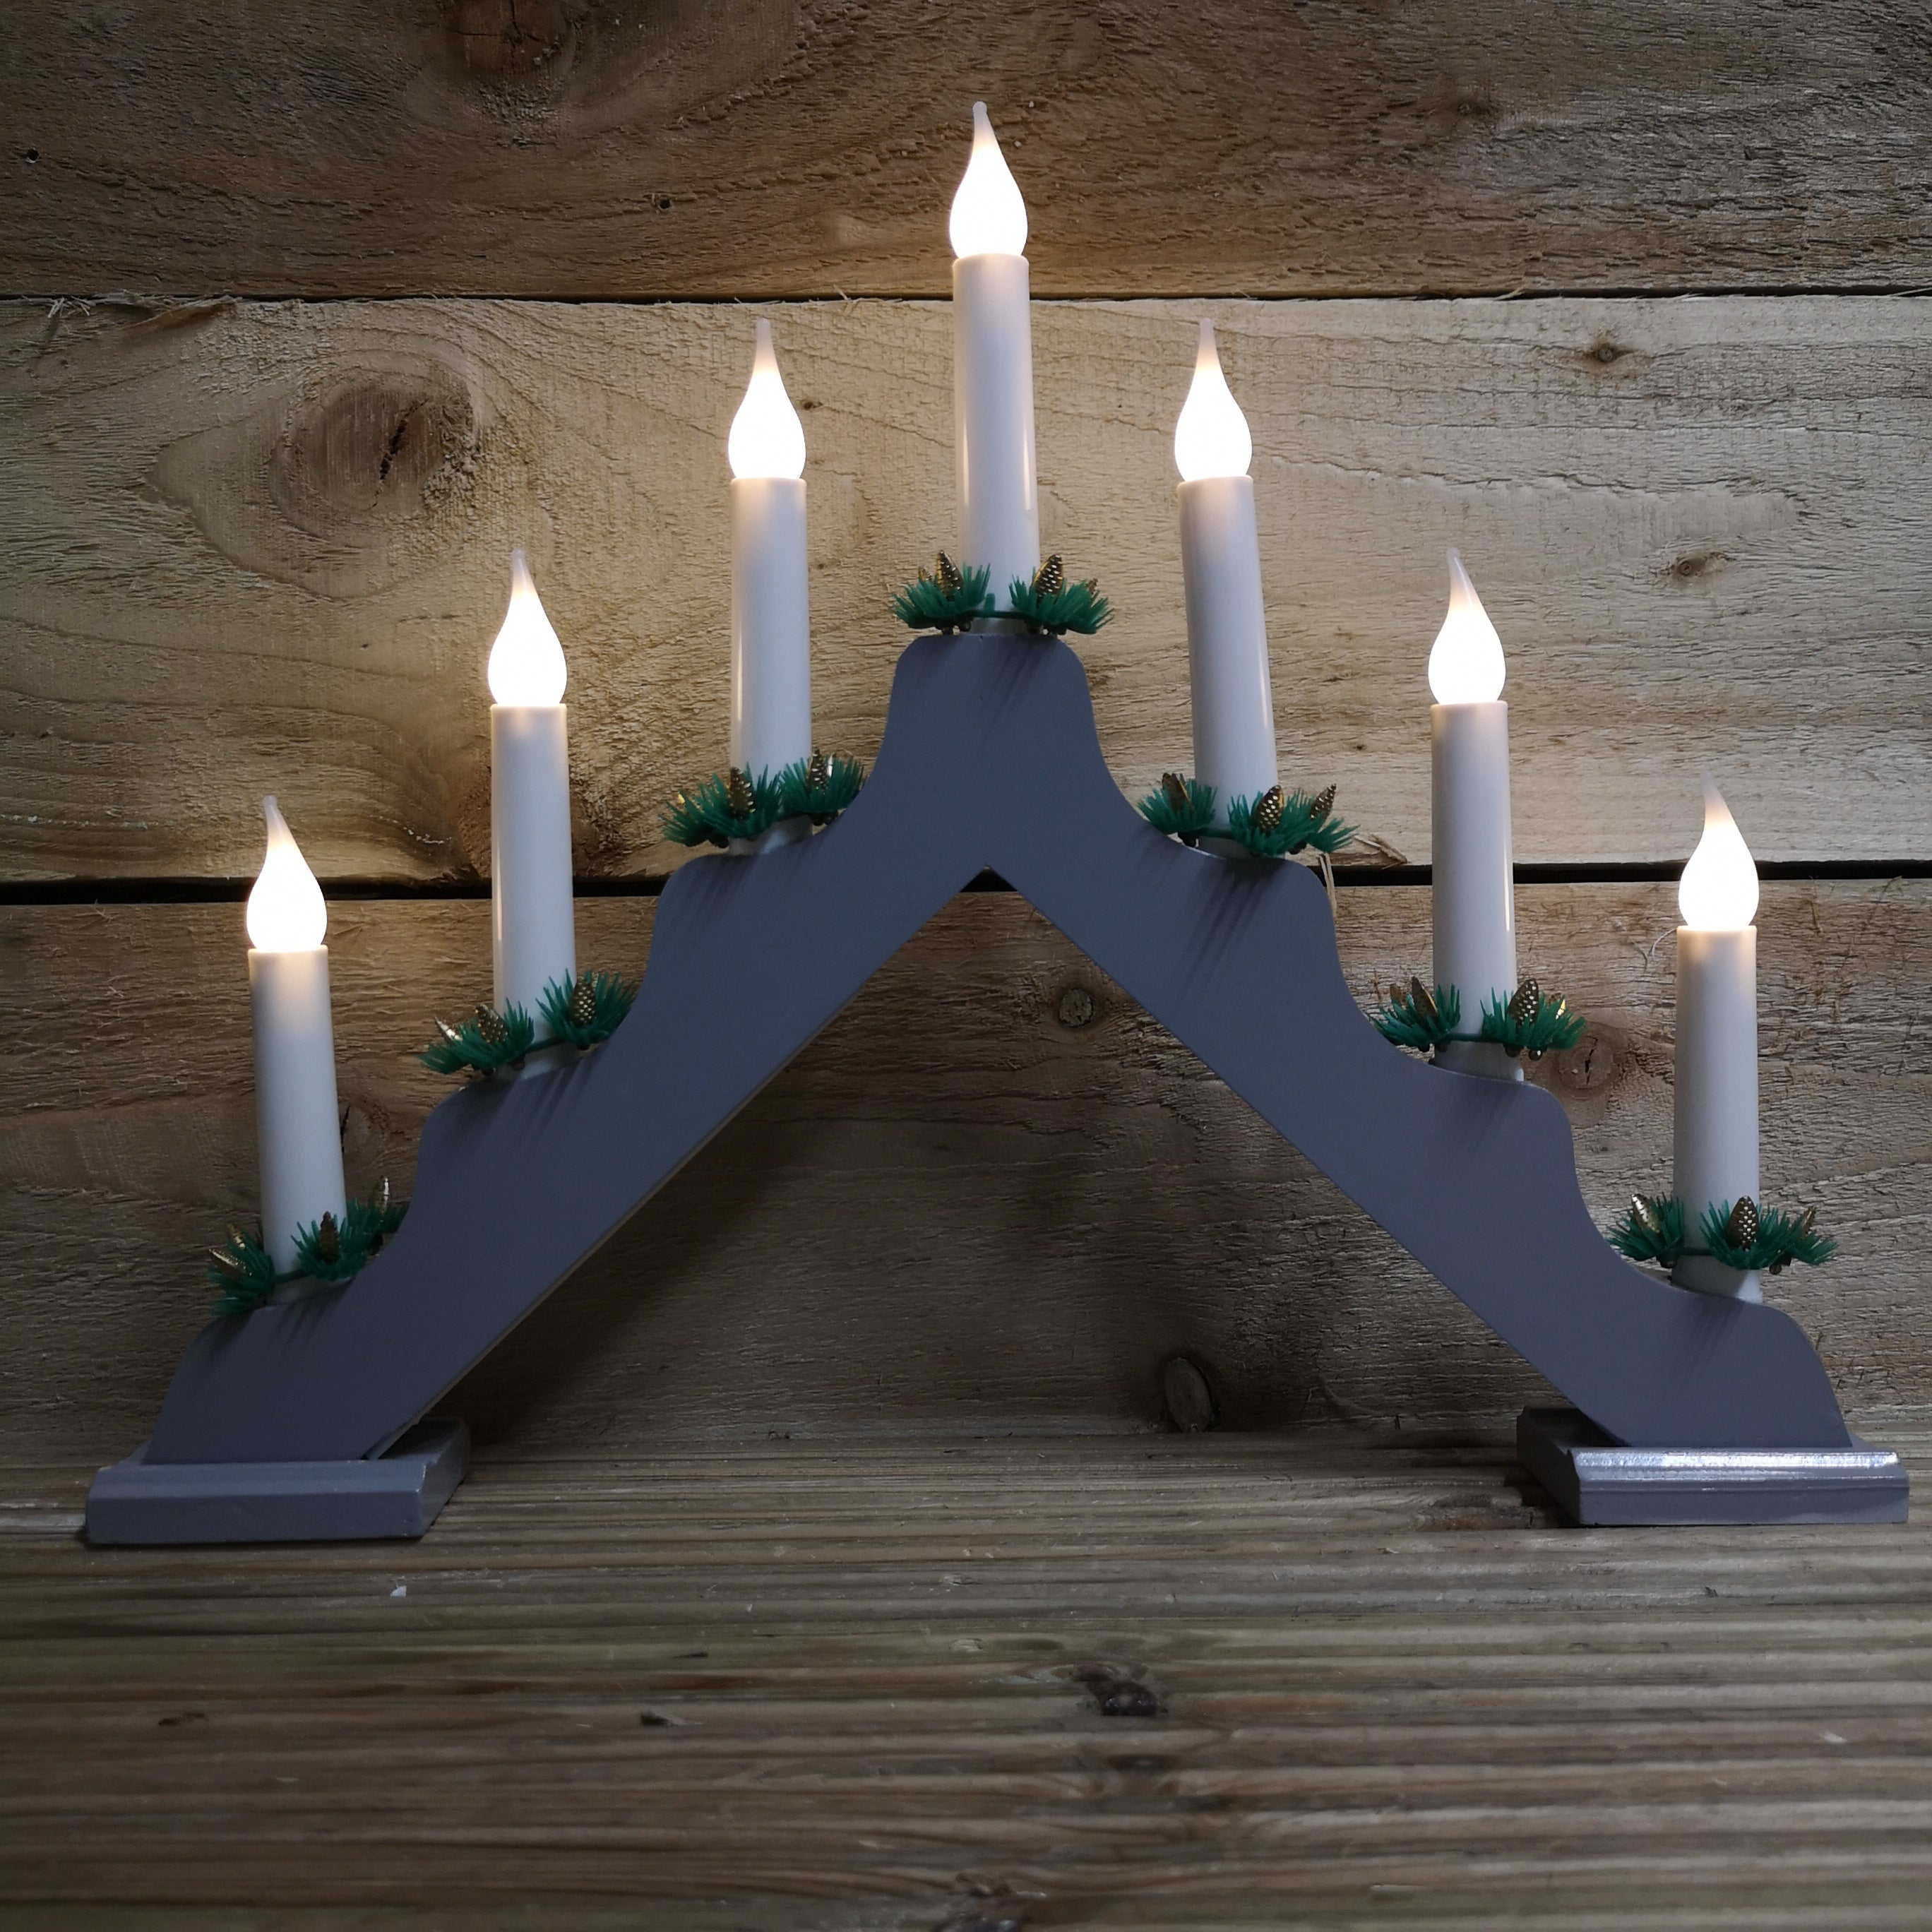 40cm Battery Operated Grey Wooden Christmas Candle Bridge with 7 Bulbs in Warm White